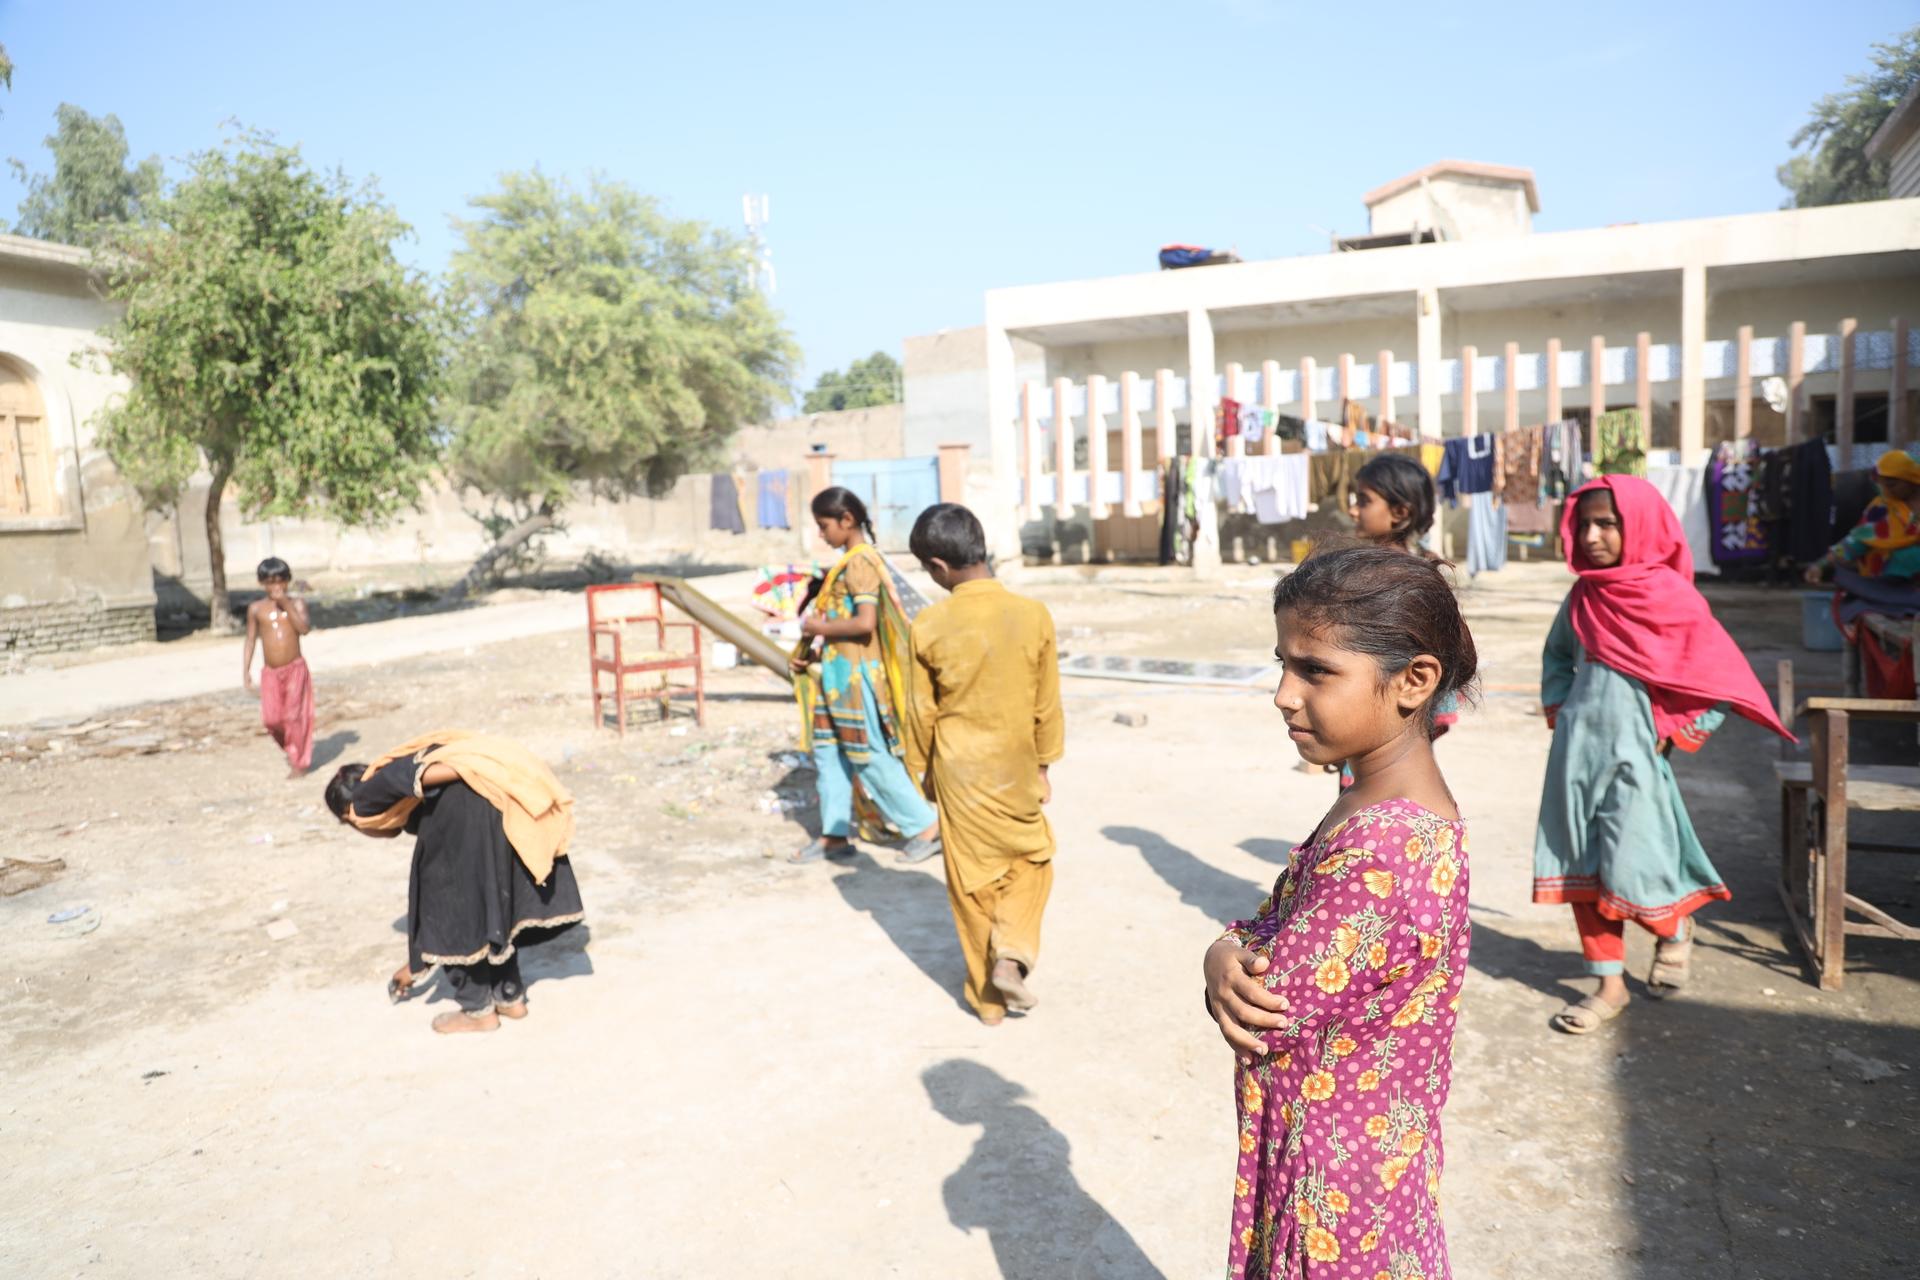 Children from Abdul Ghani’s own family and extended family play together in a courtyard in Pakistan.